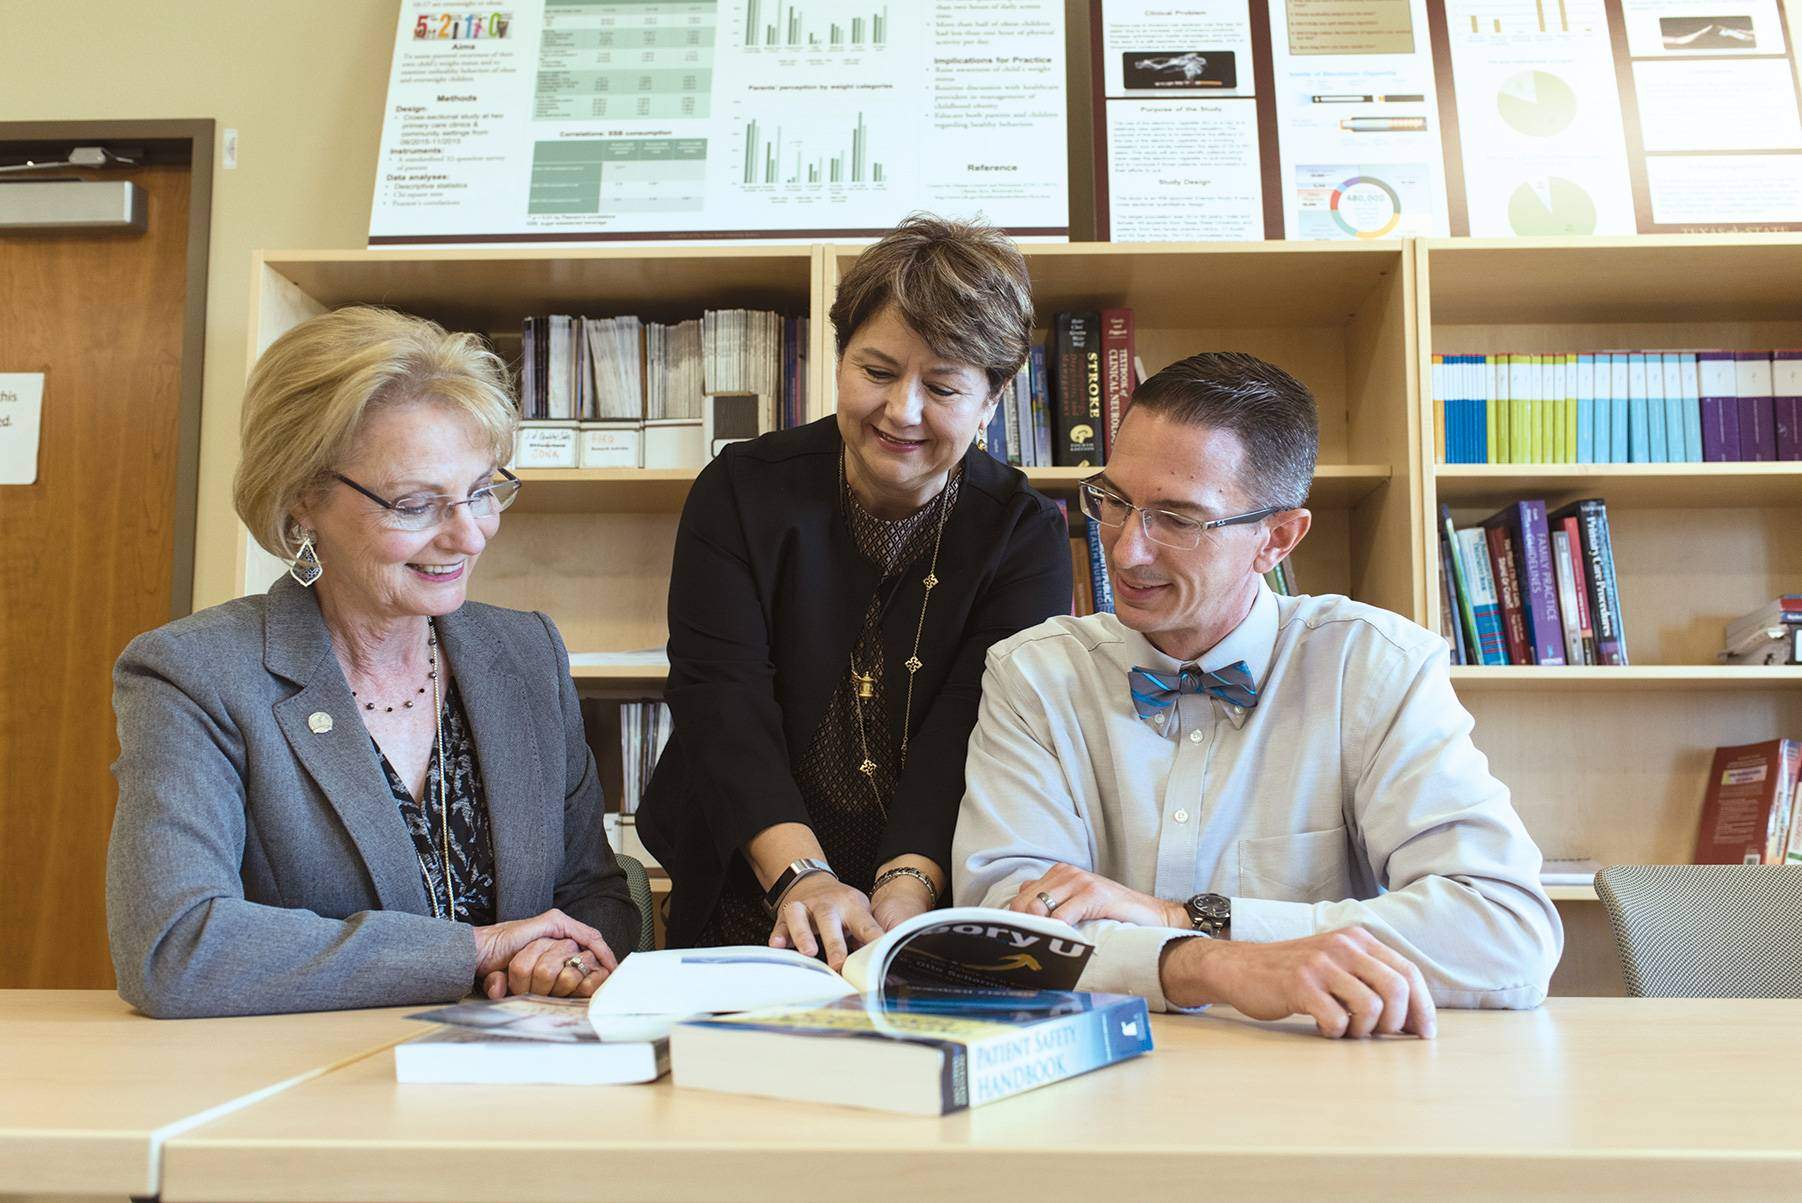 adults going over a part in a book at a desk